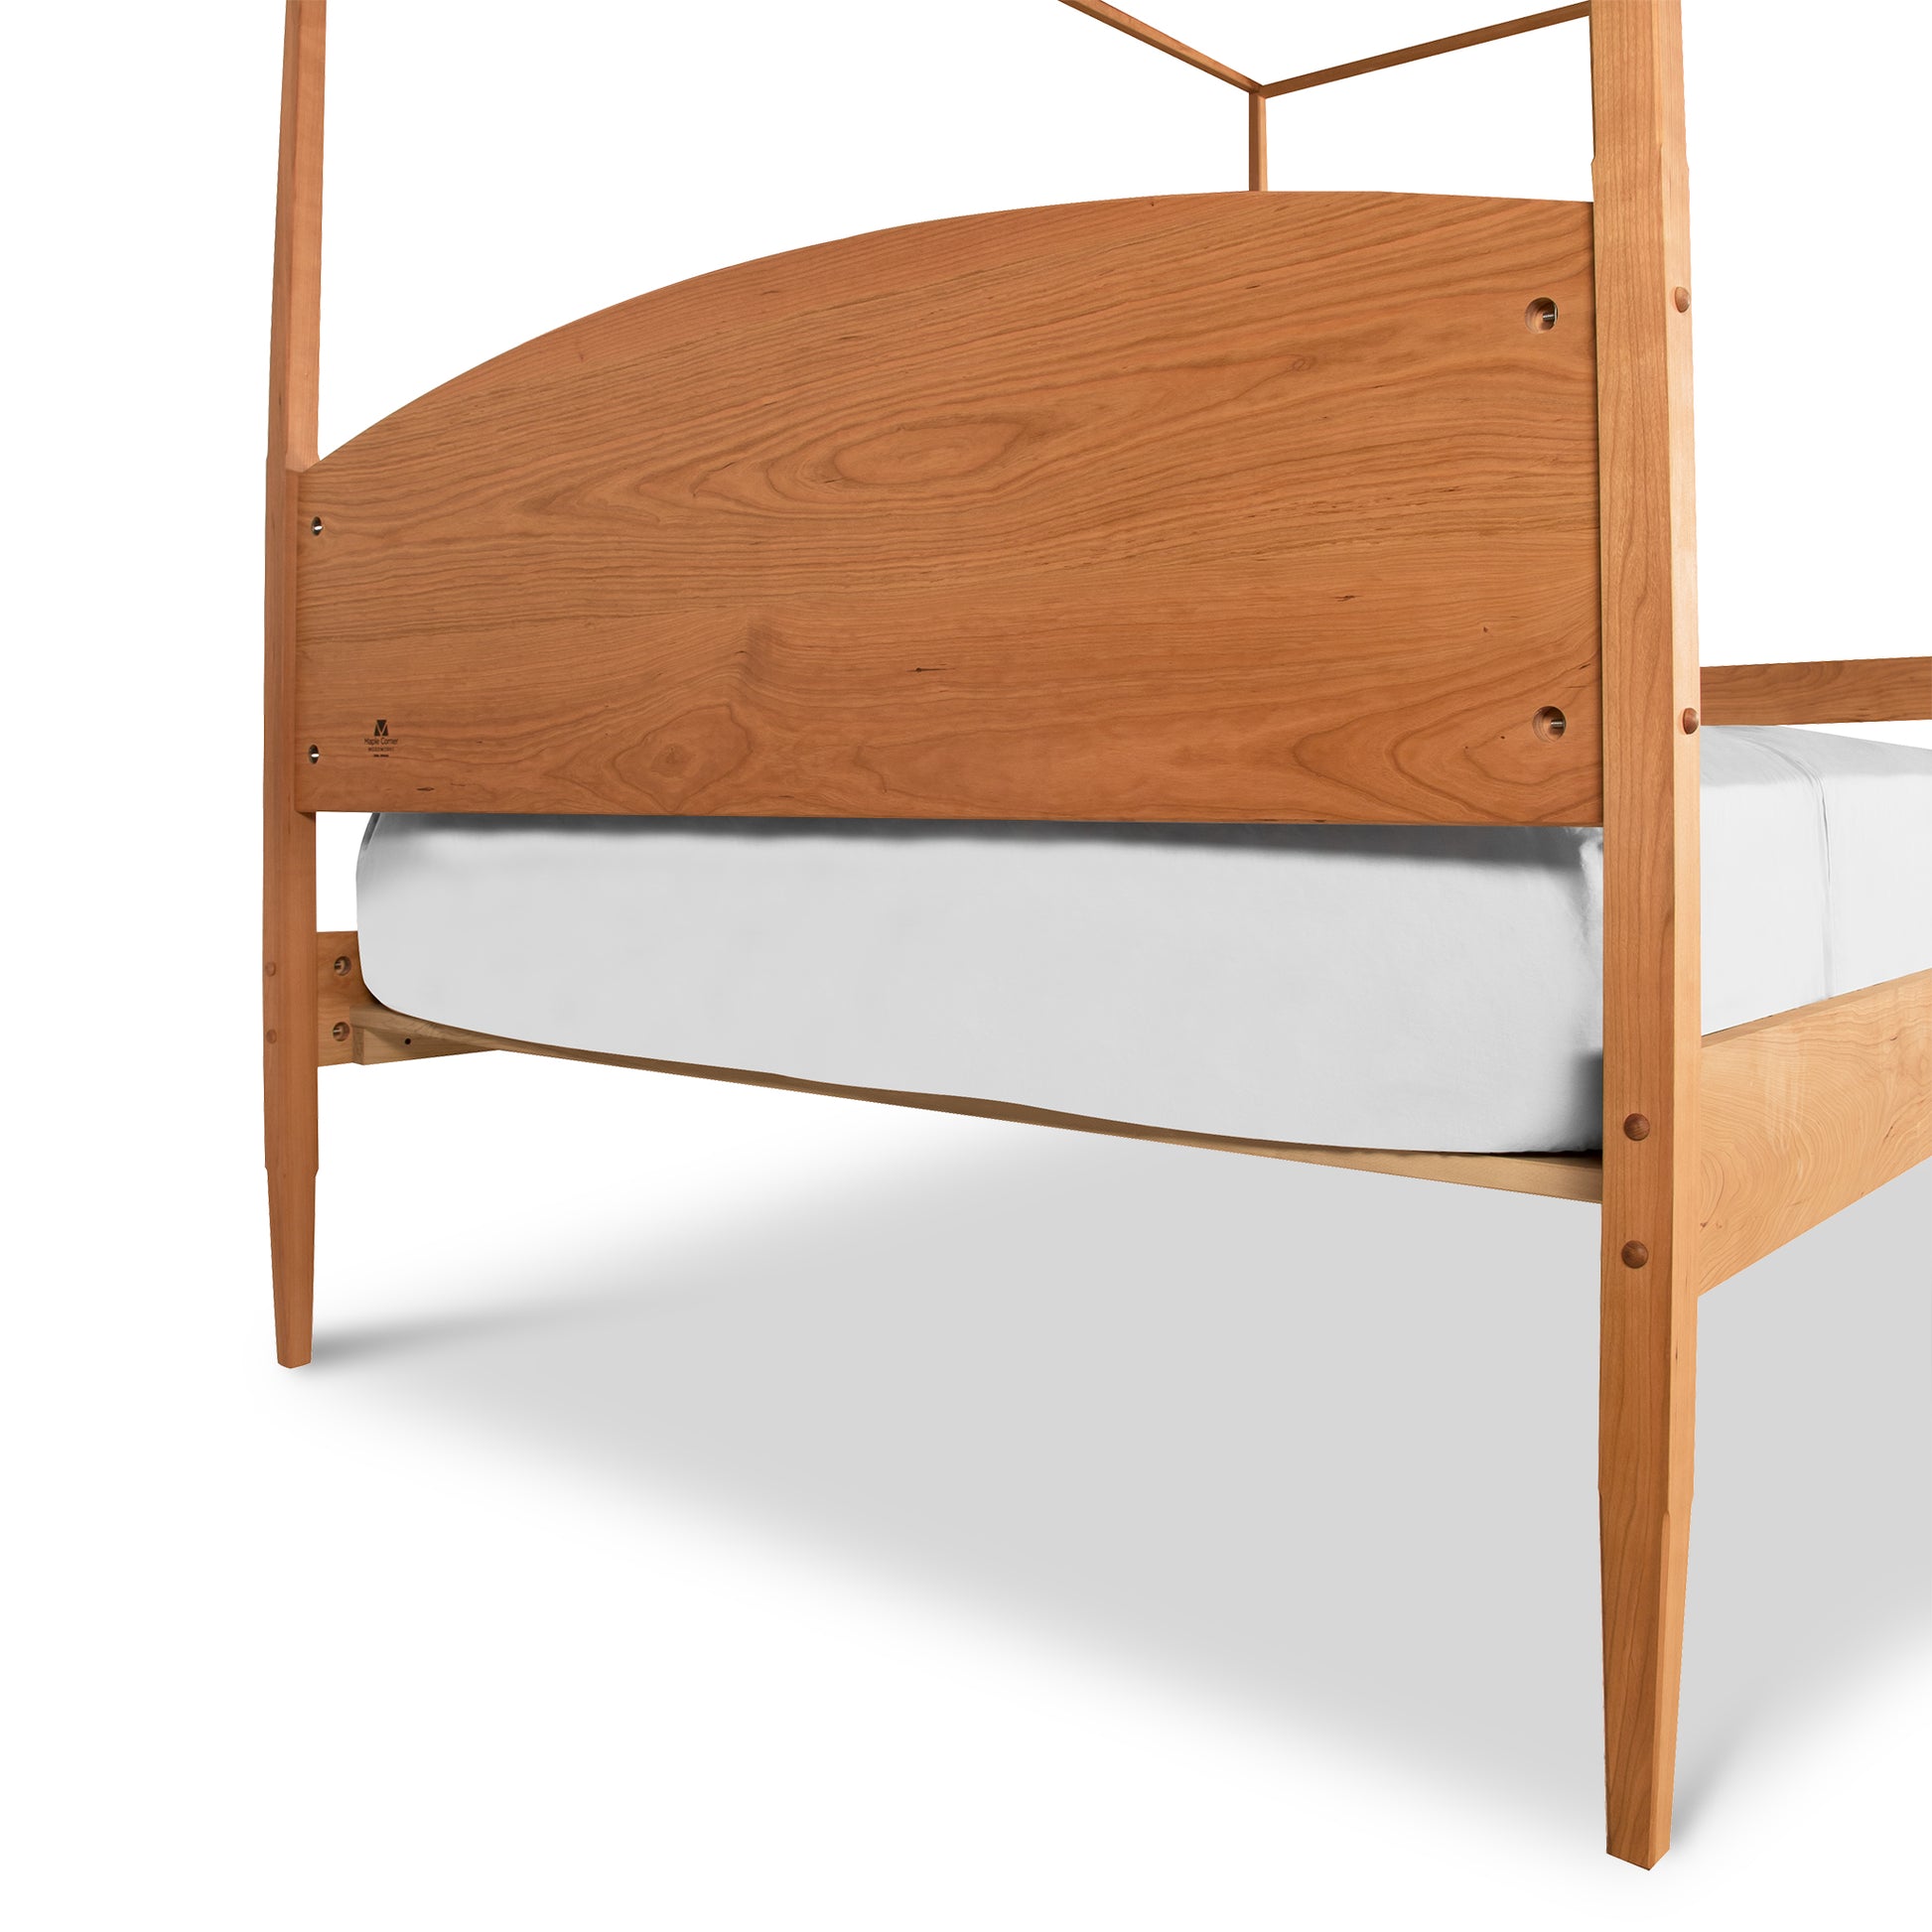 A wooden canopy bed with a white mattress.